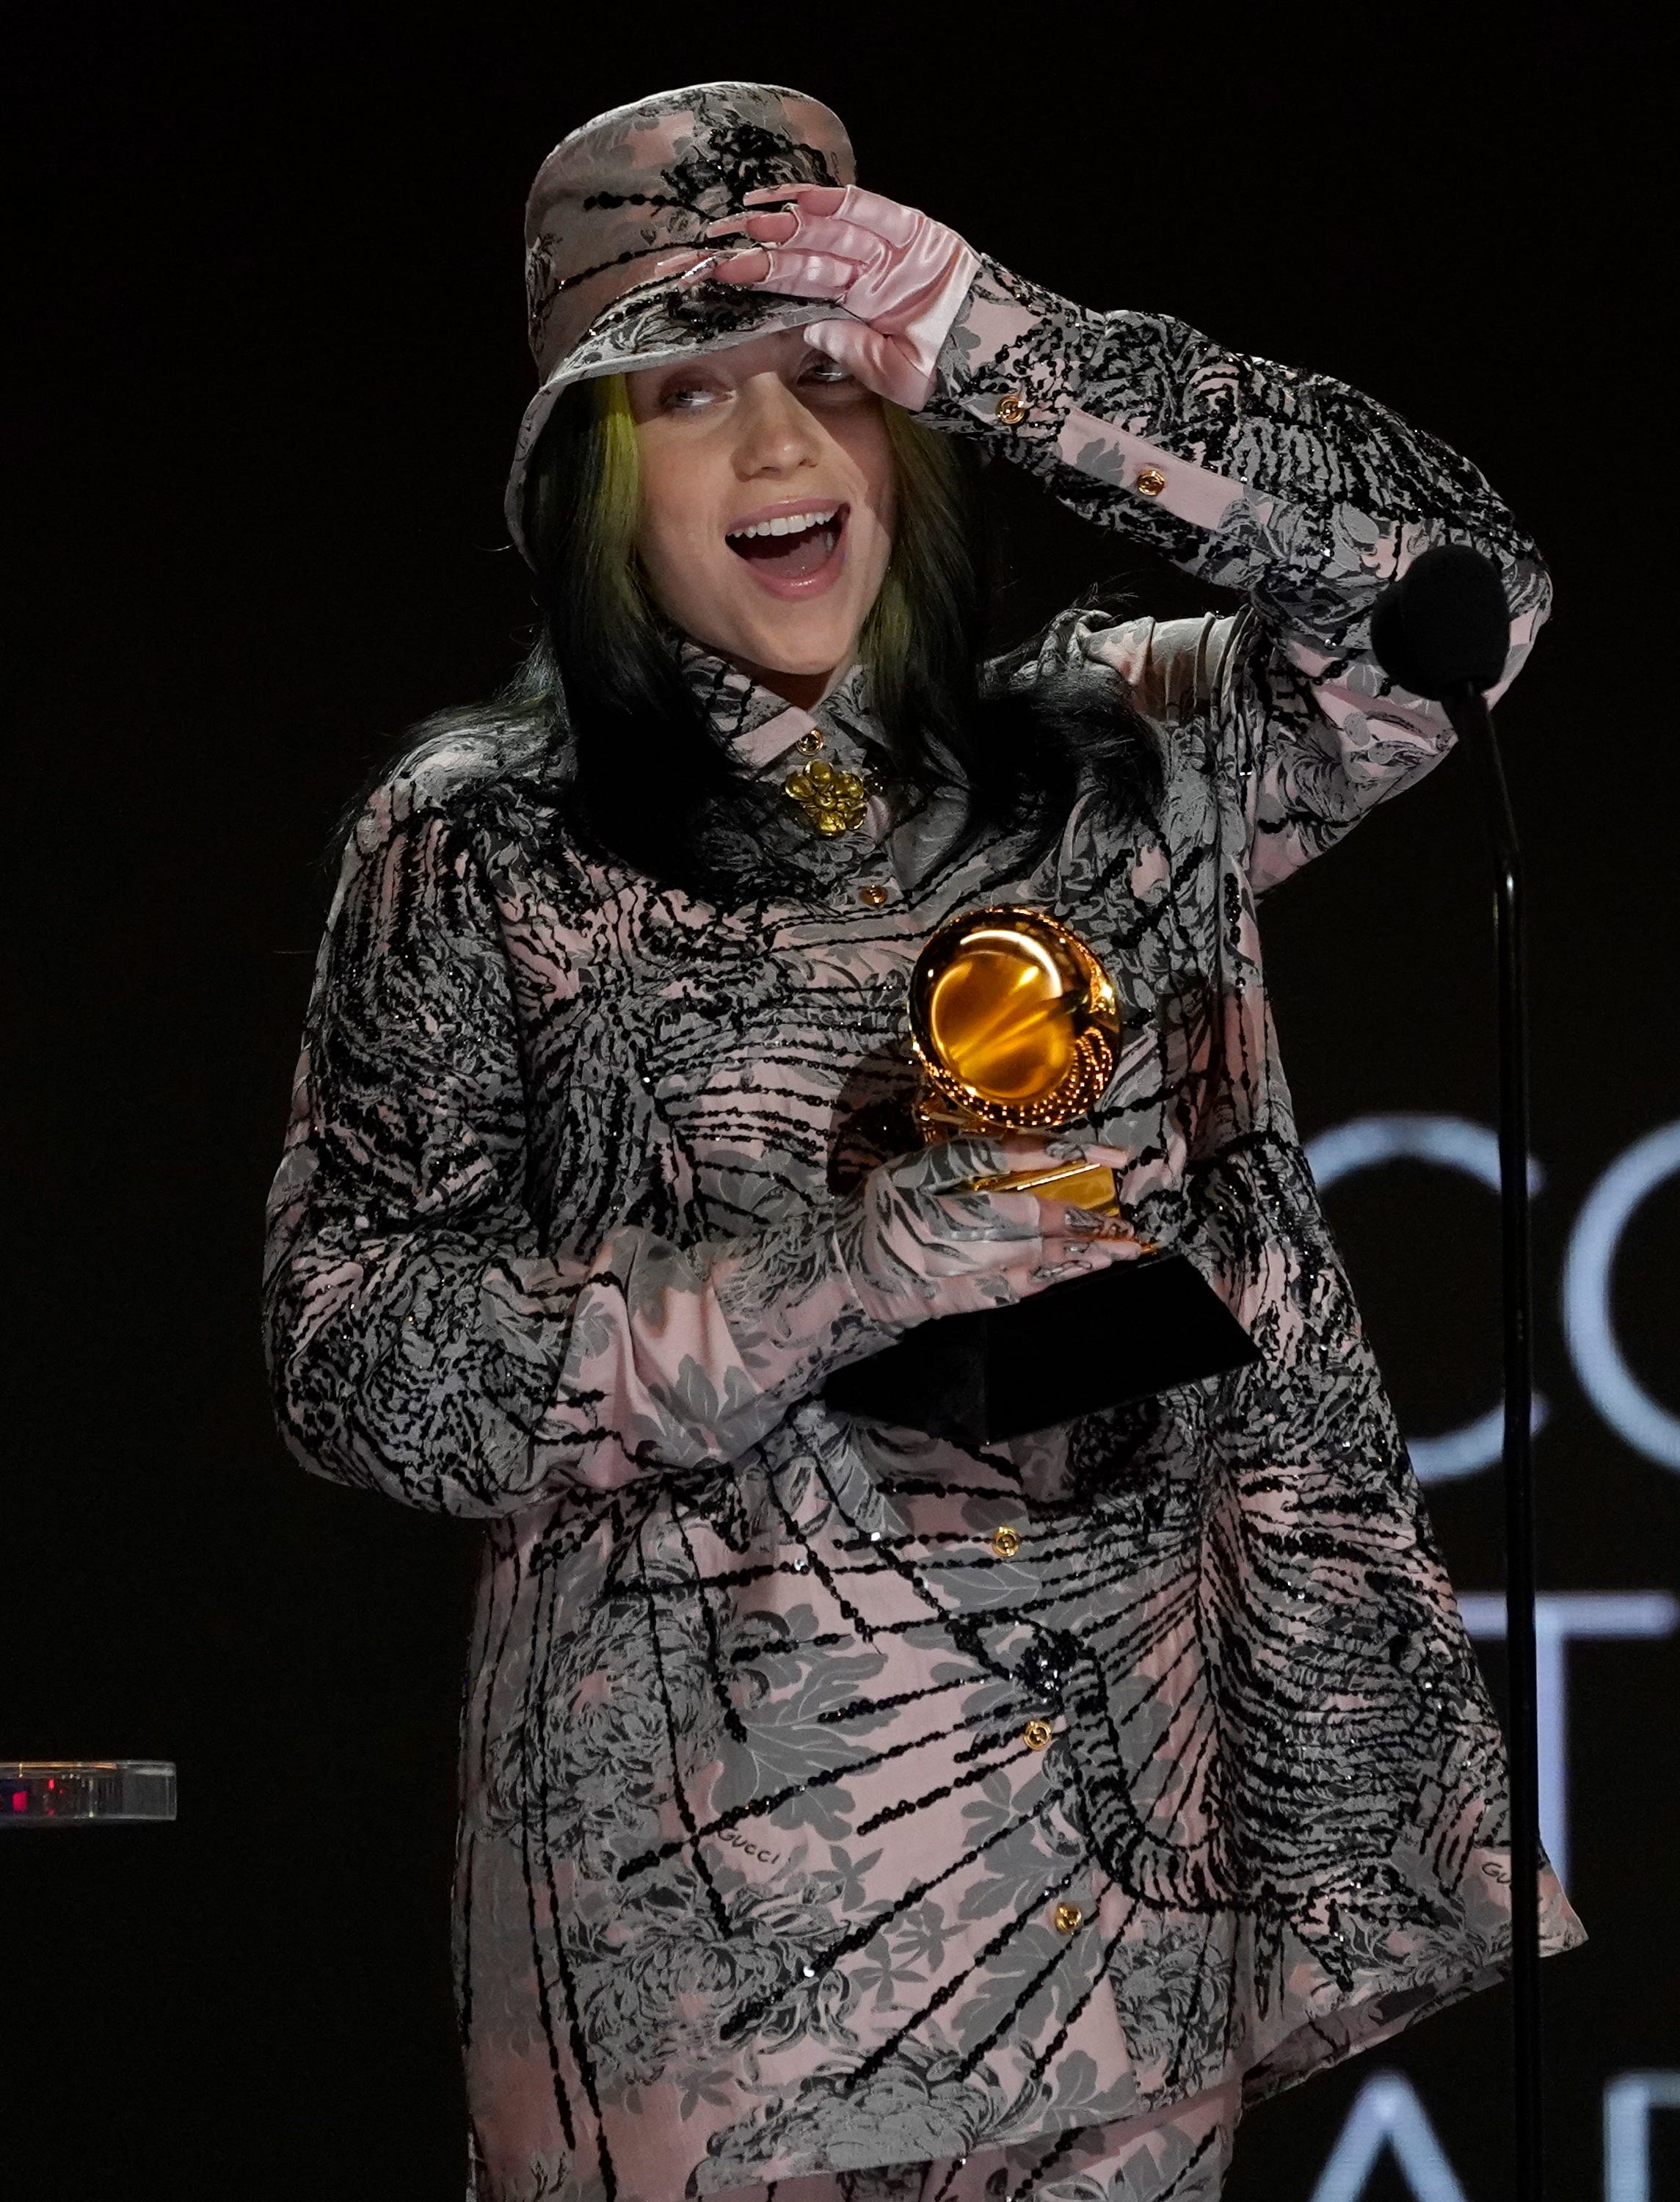 Billie Eilish reacts as she accepts the award for record of the year for "Everything I Wanted" at the 63rd annual Grammy Awards at the Los Angeles Convention Center on Sunday, March 14, 2021.